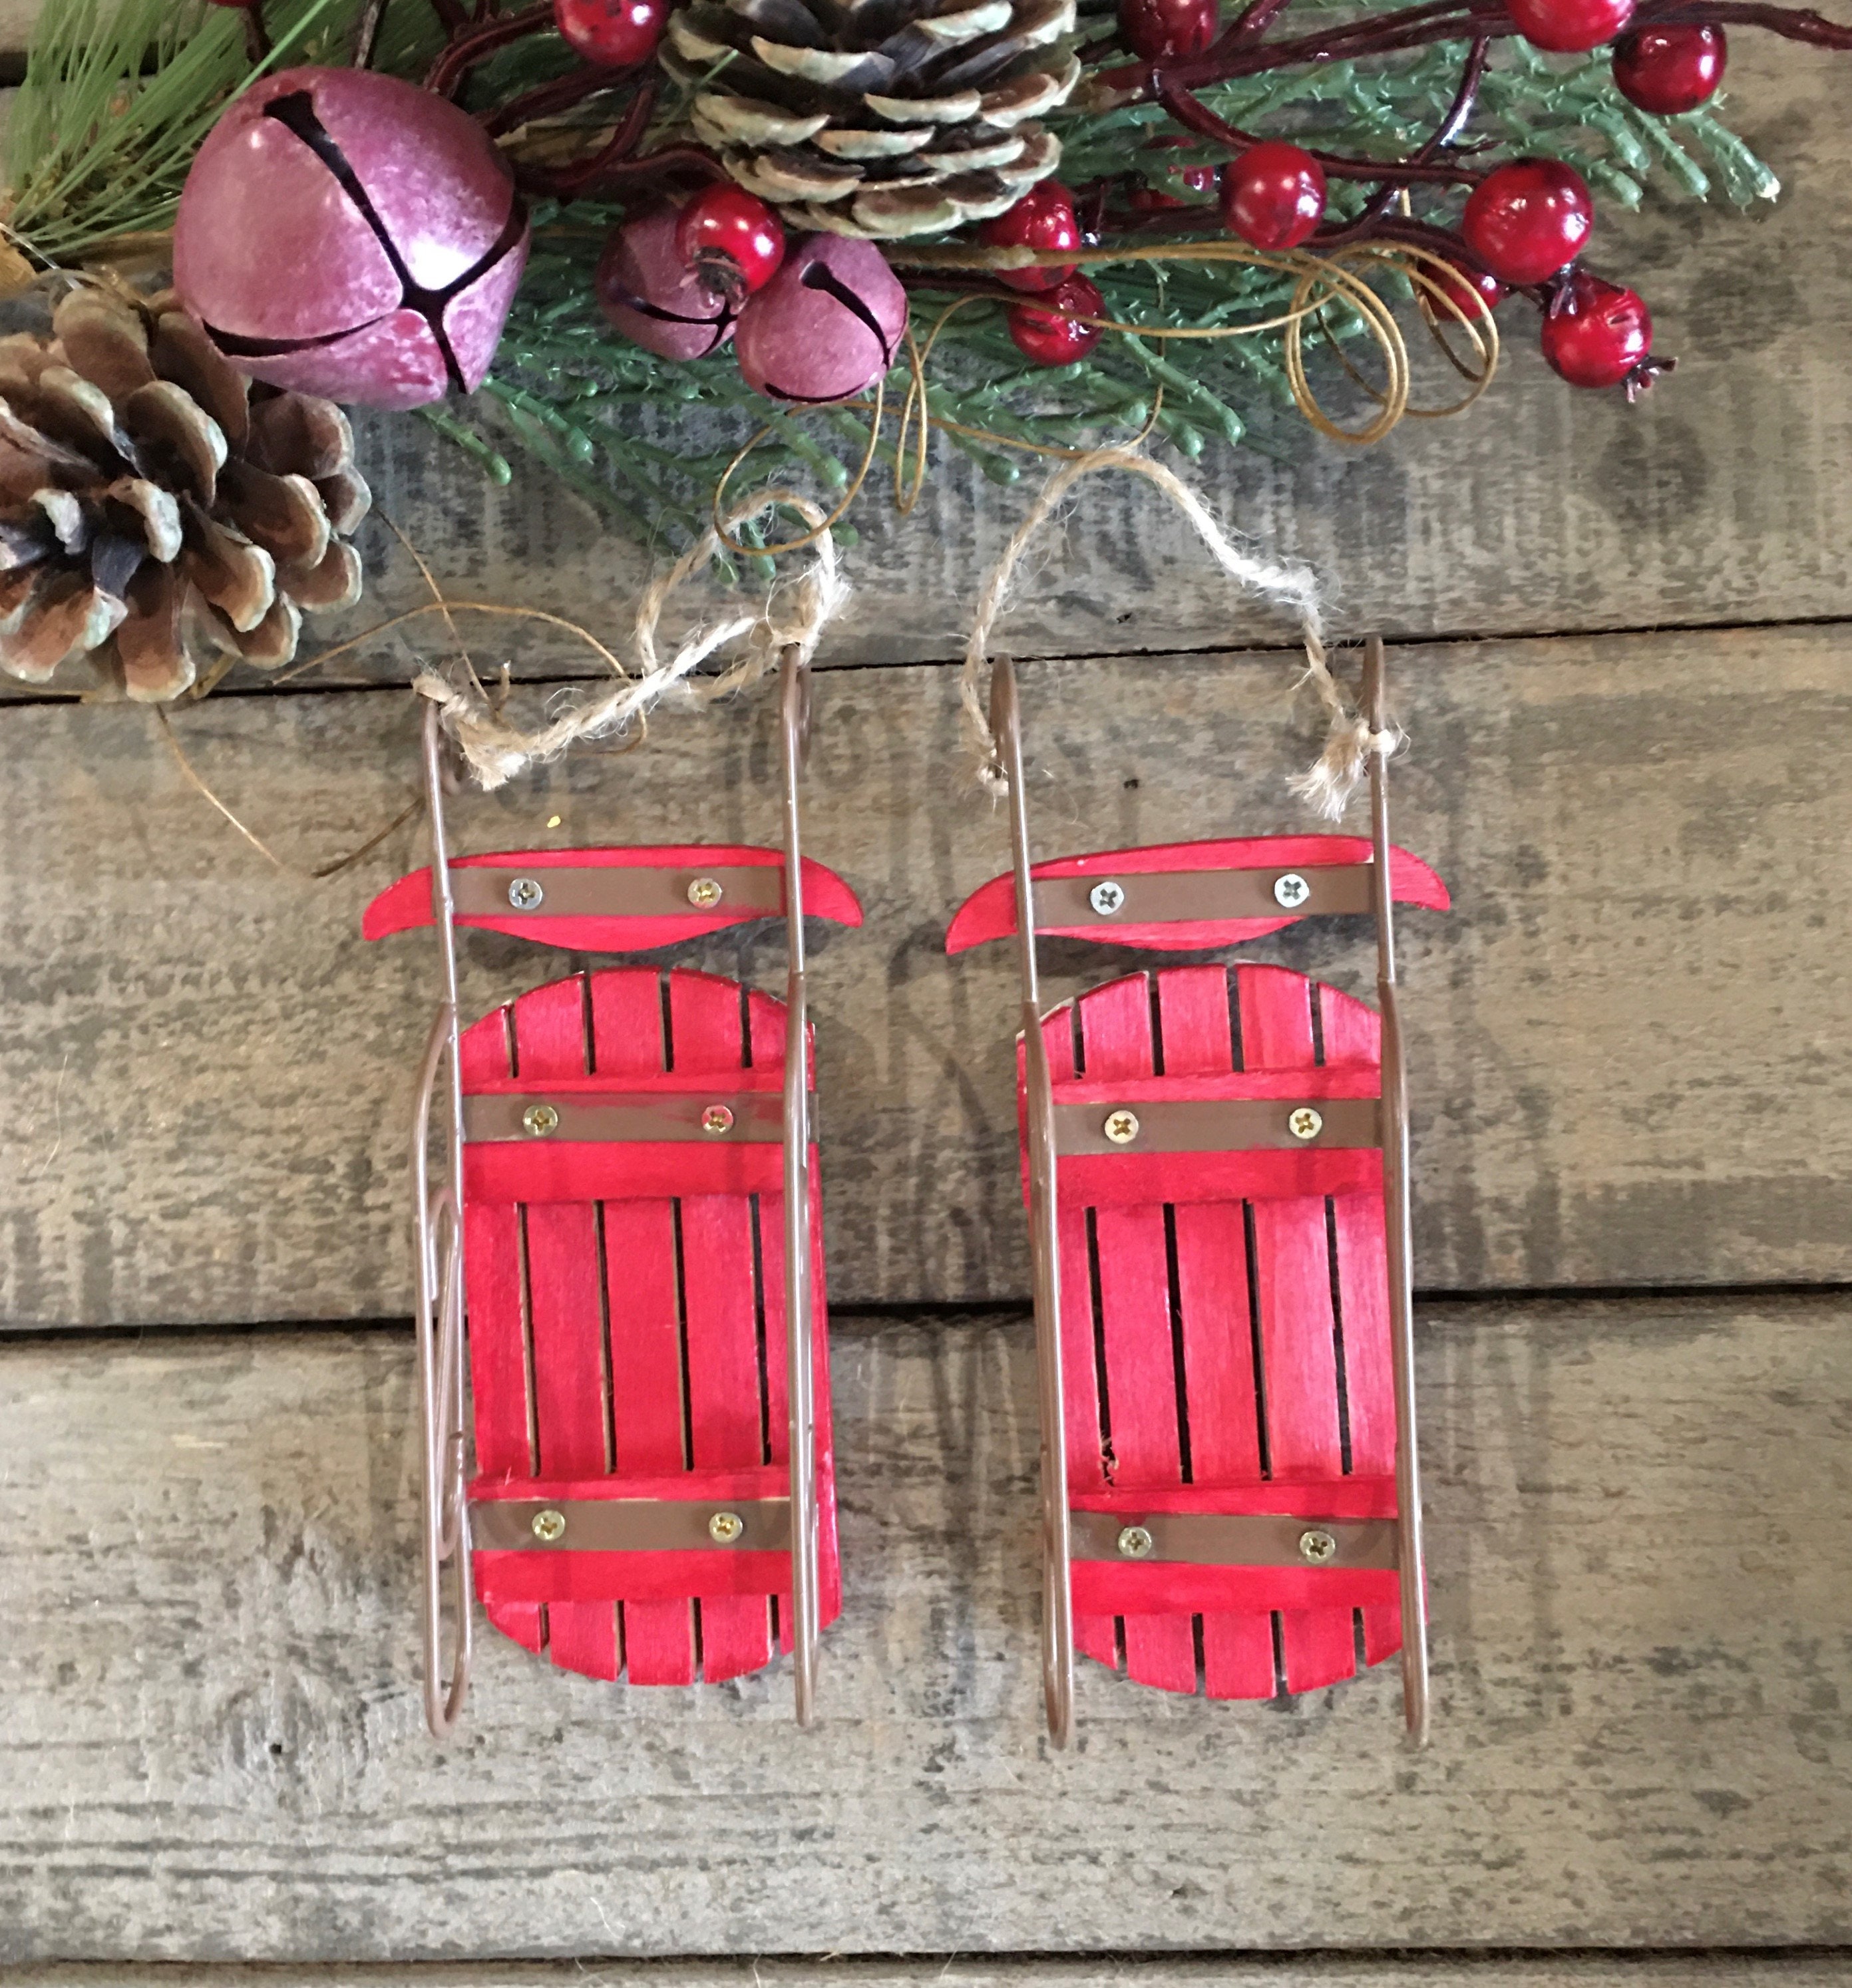 Christmas Sled Ornaments (Set of 3) Wooden Holiday Sleigh Tree Decorations - Hand Painted Farmhouse Christmas, Vintage Rustic Decorative Hanging